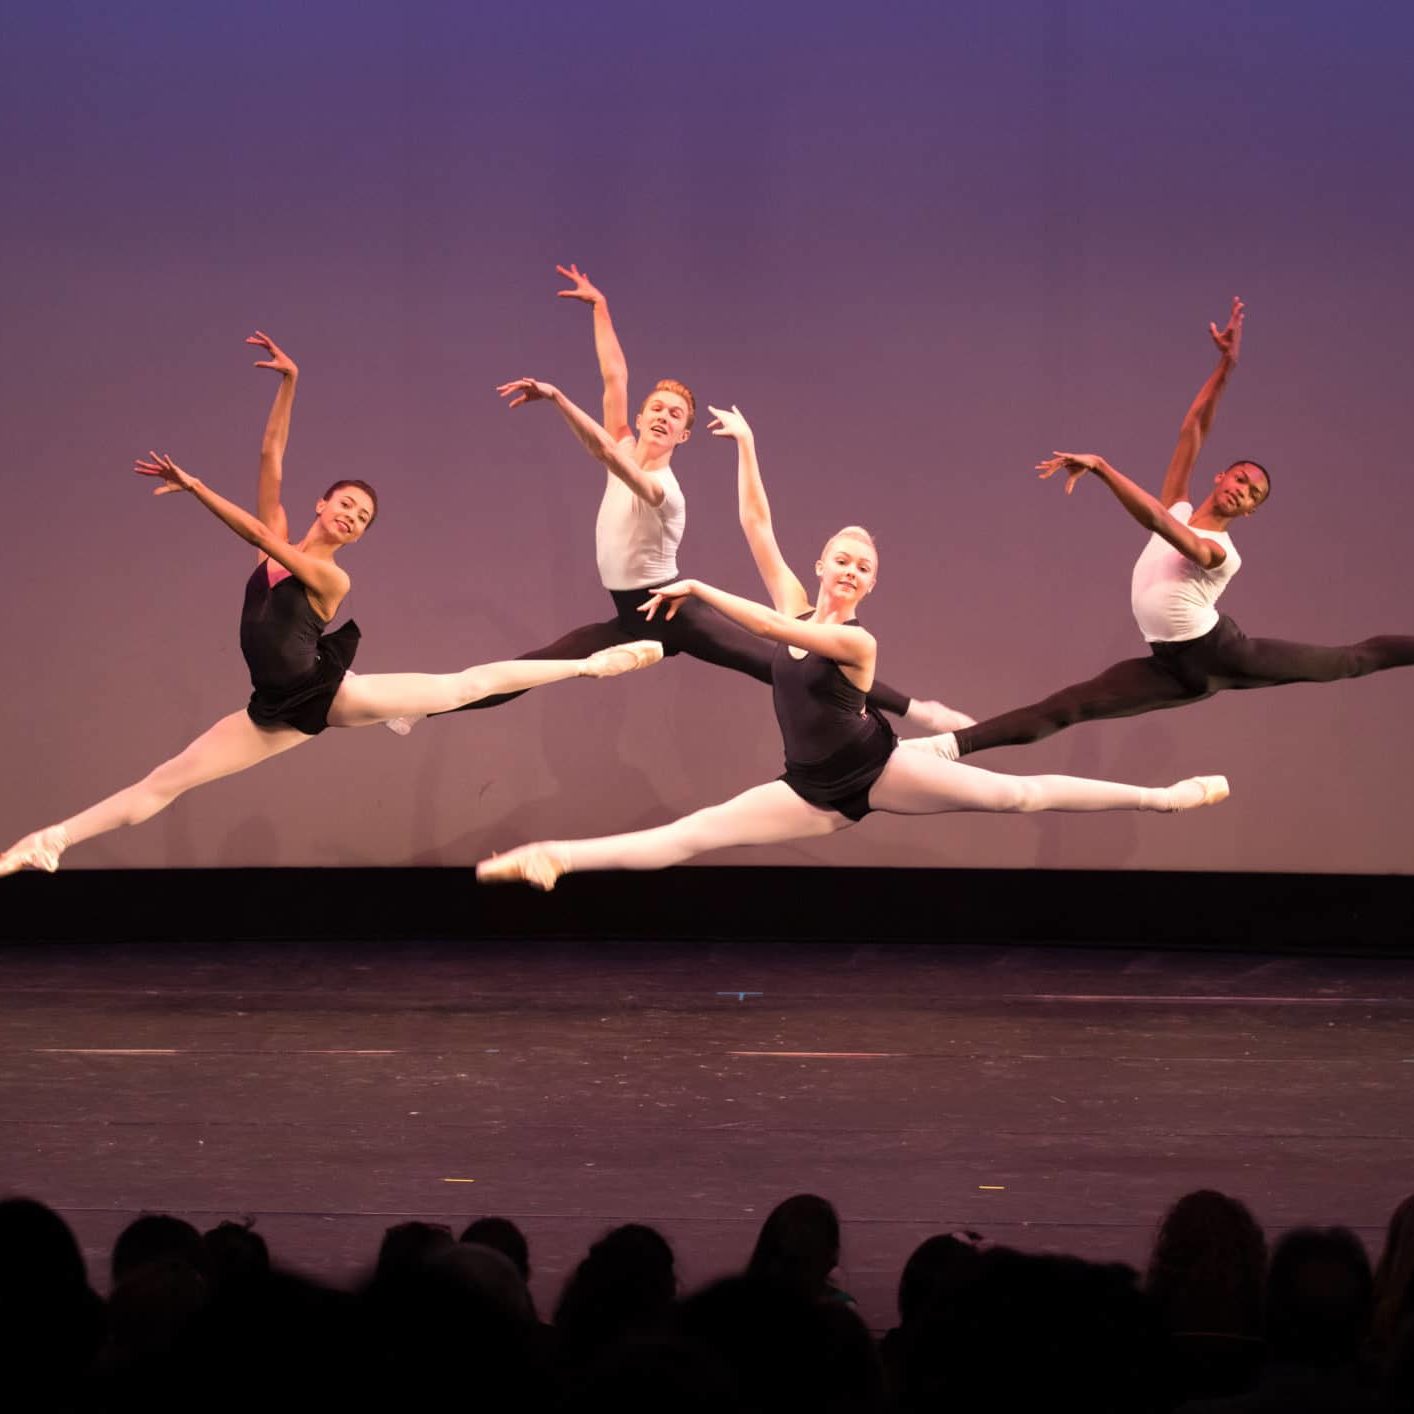 Photograph of four dancers in the air mid-leap